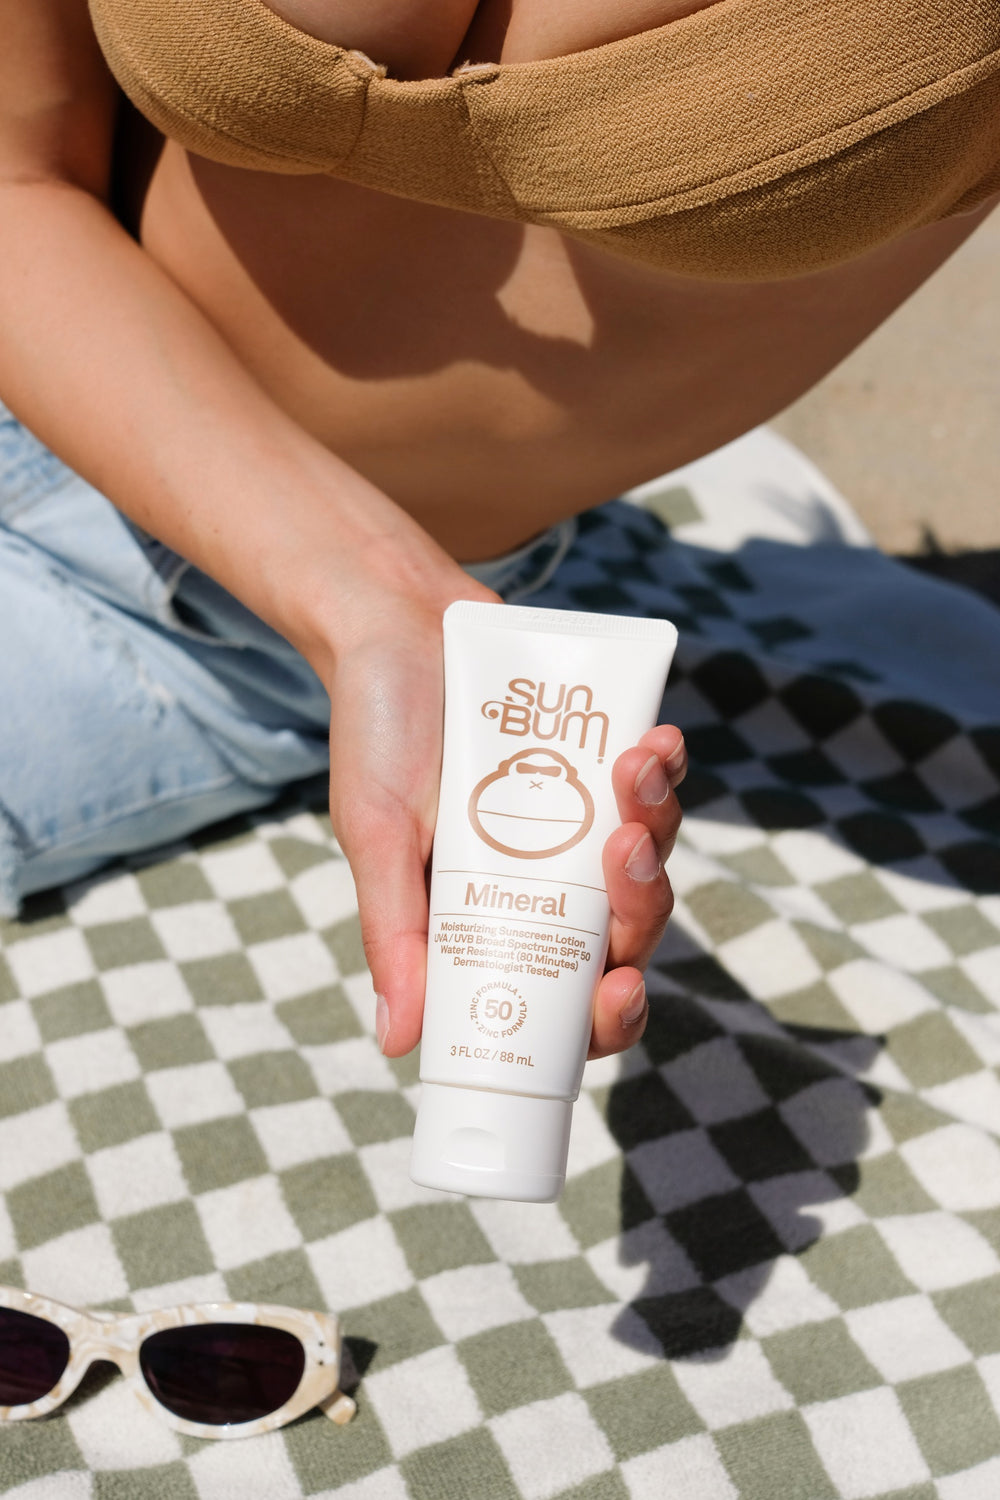 Mineral SPF 50 Lotion